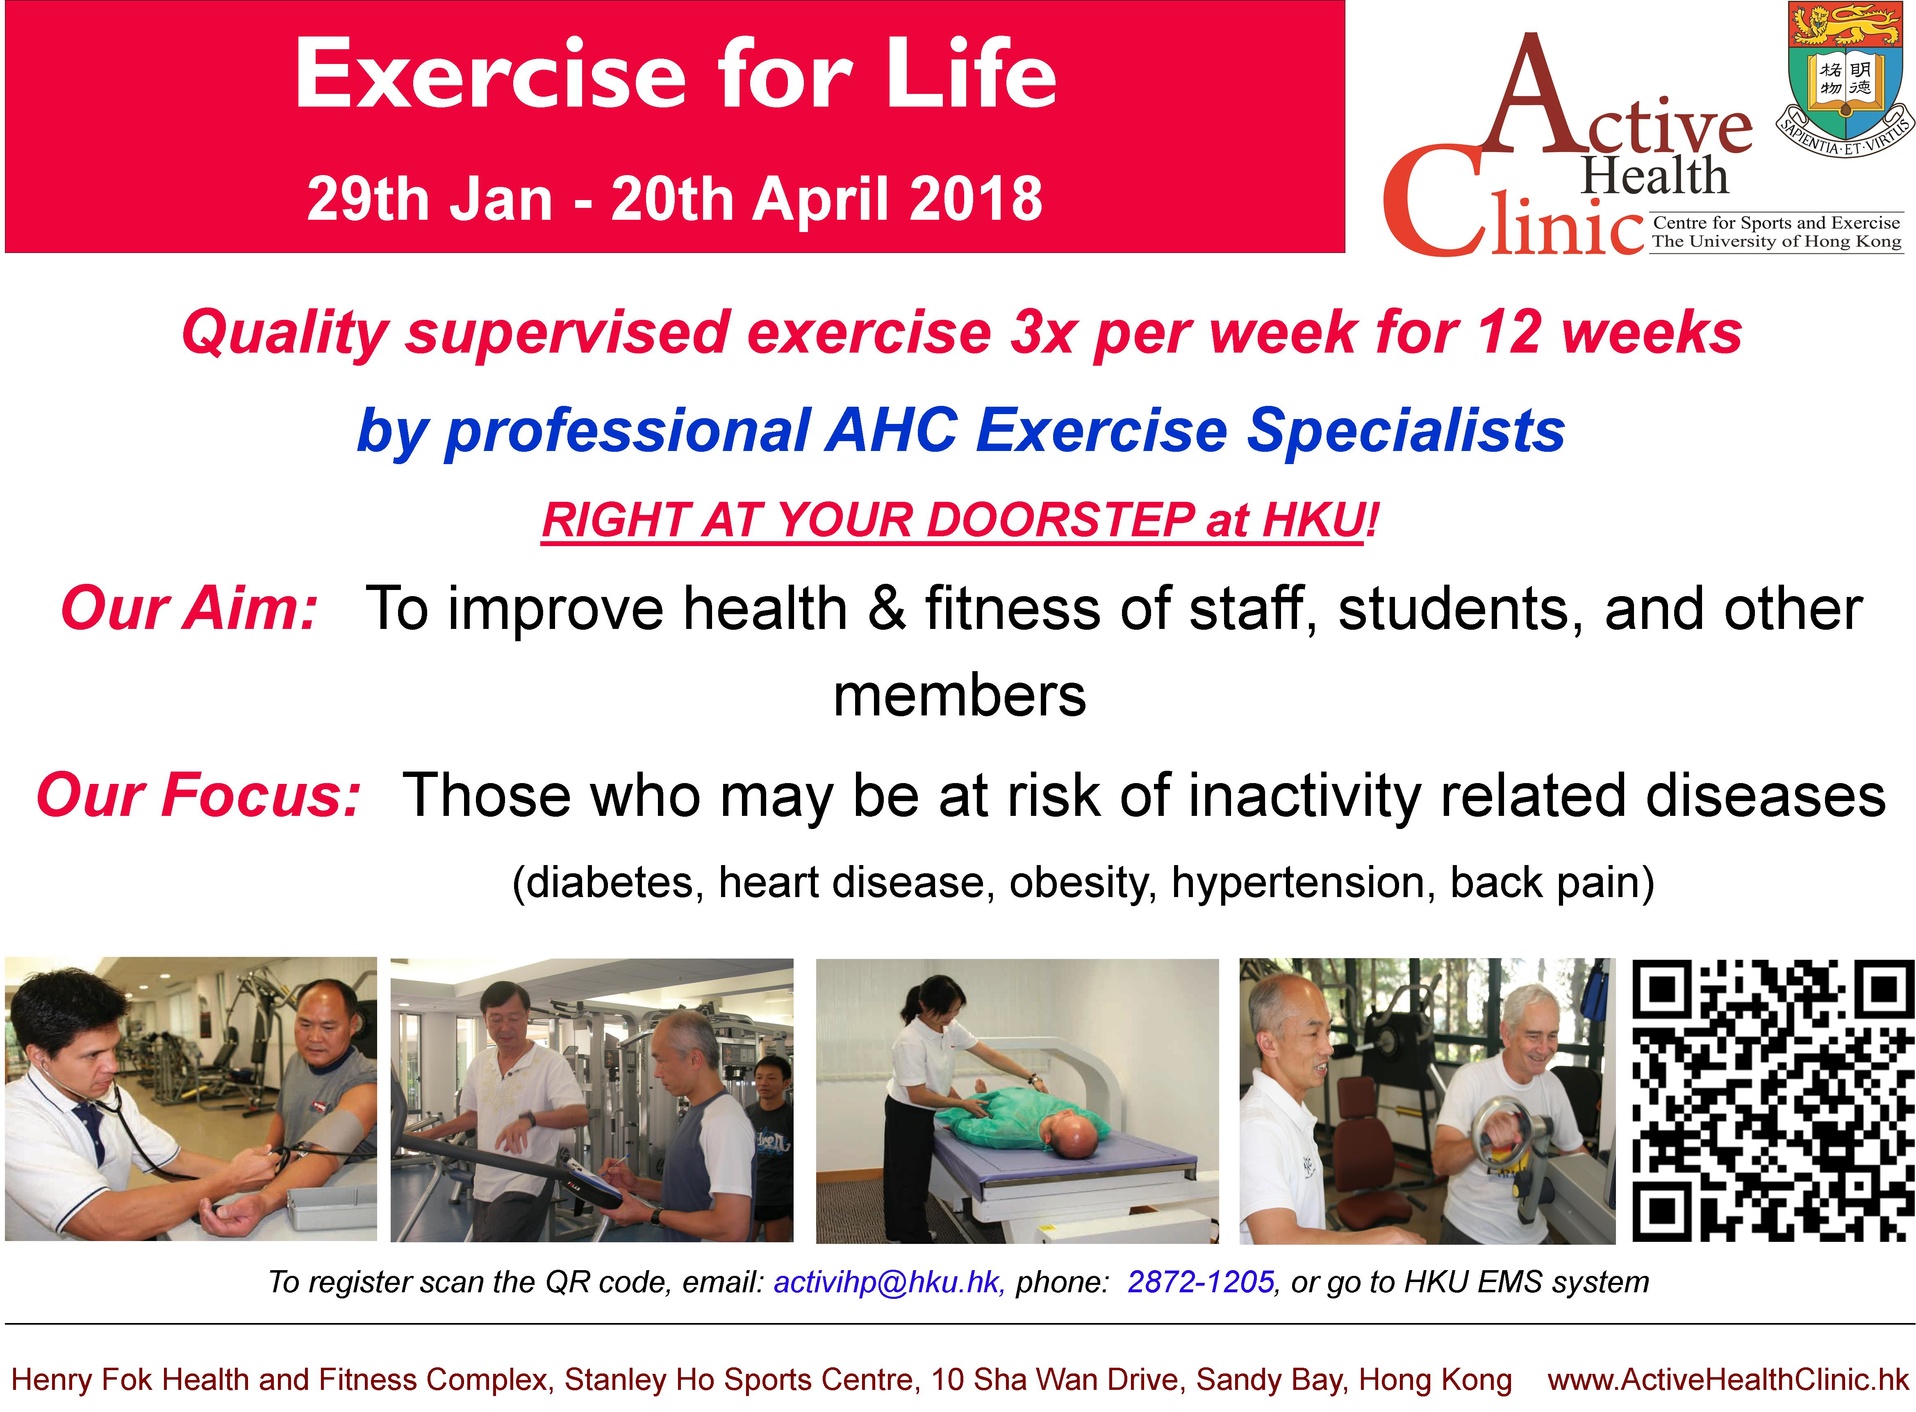 Exercise for Life Programme